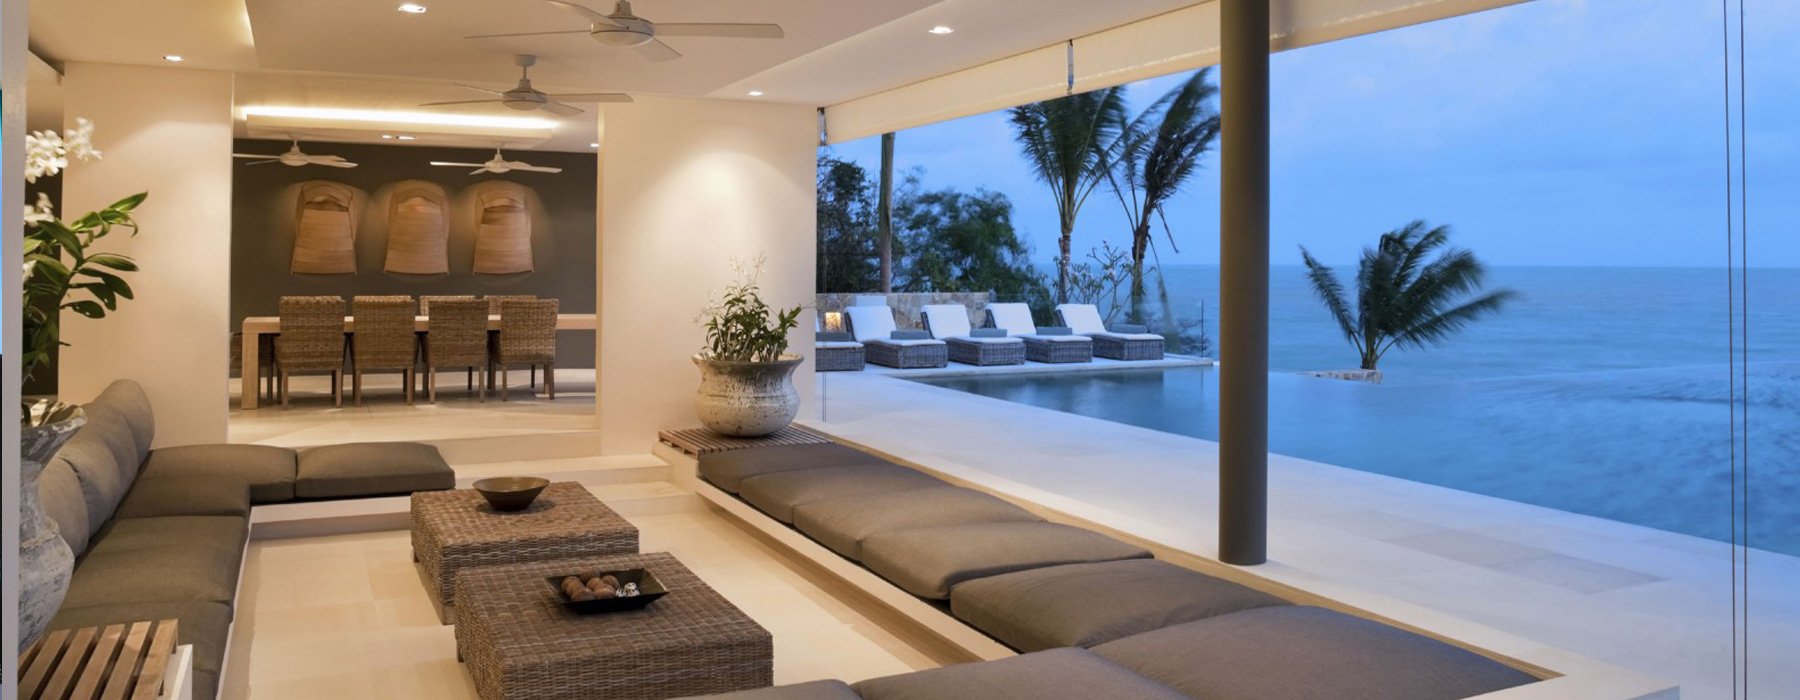 home lighting automation systems